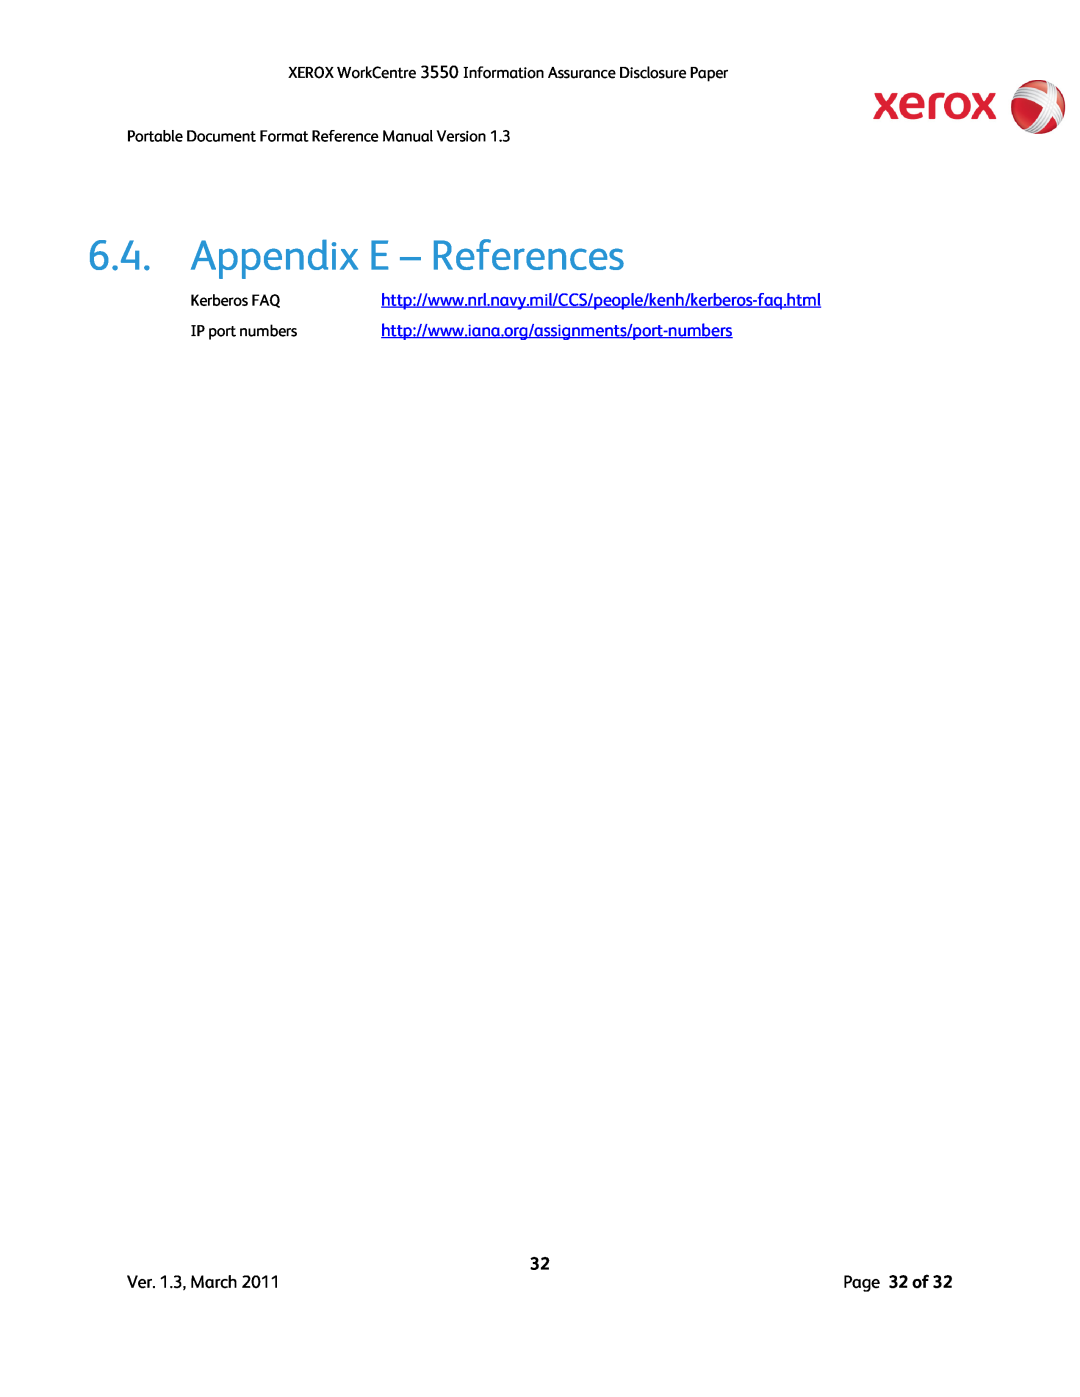 Xerox 3550 manual Appendix E - References, Ver. 1.3, March, Page 32 of 